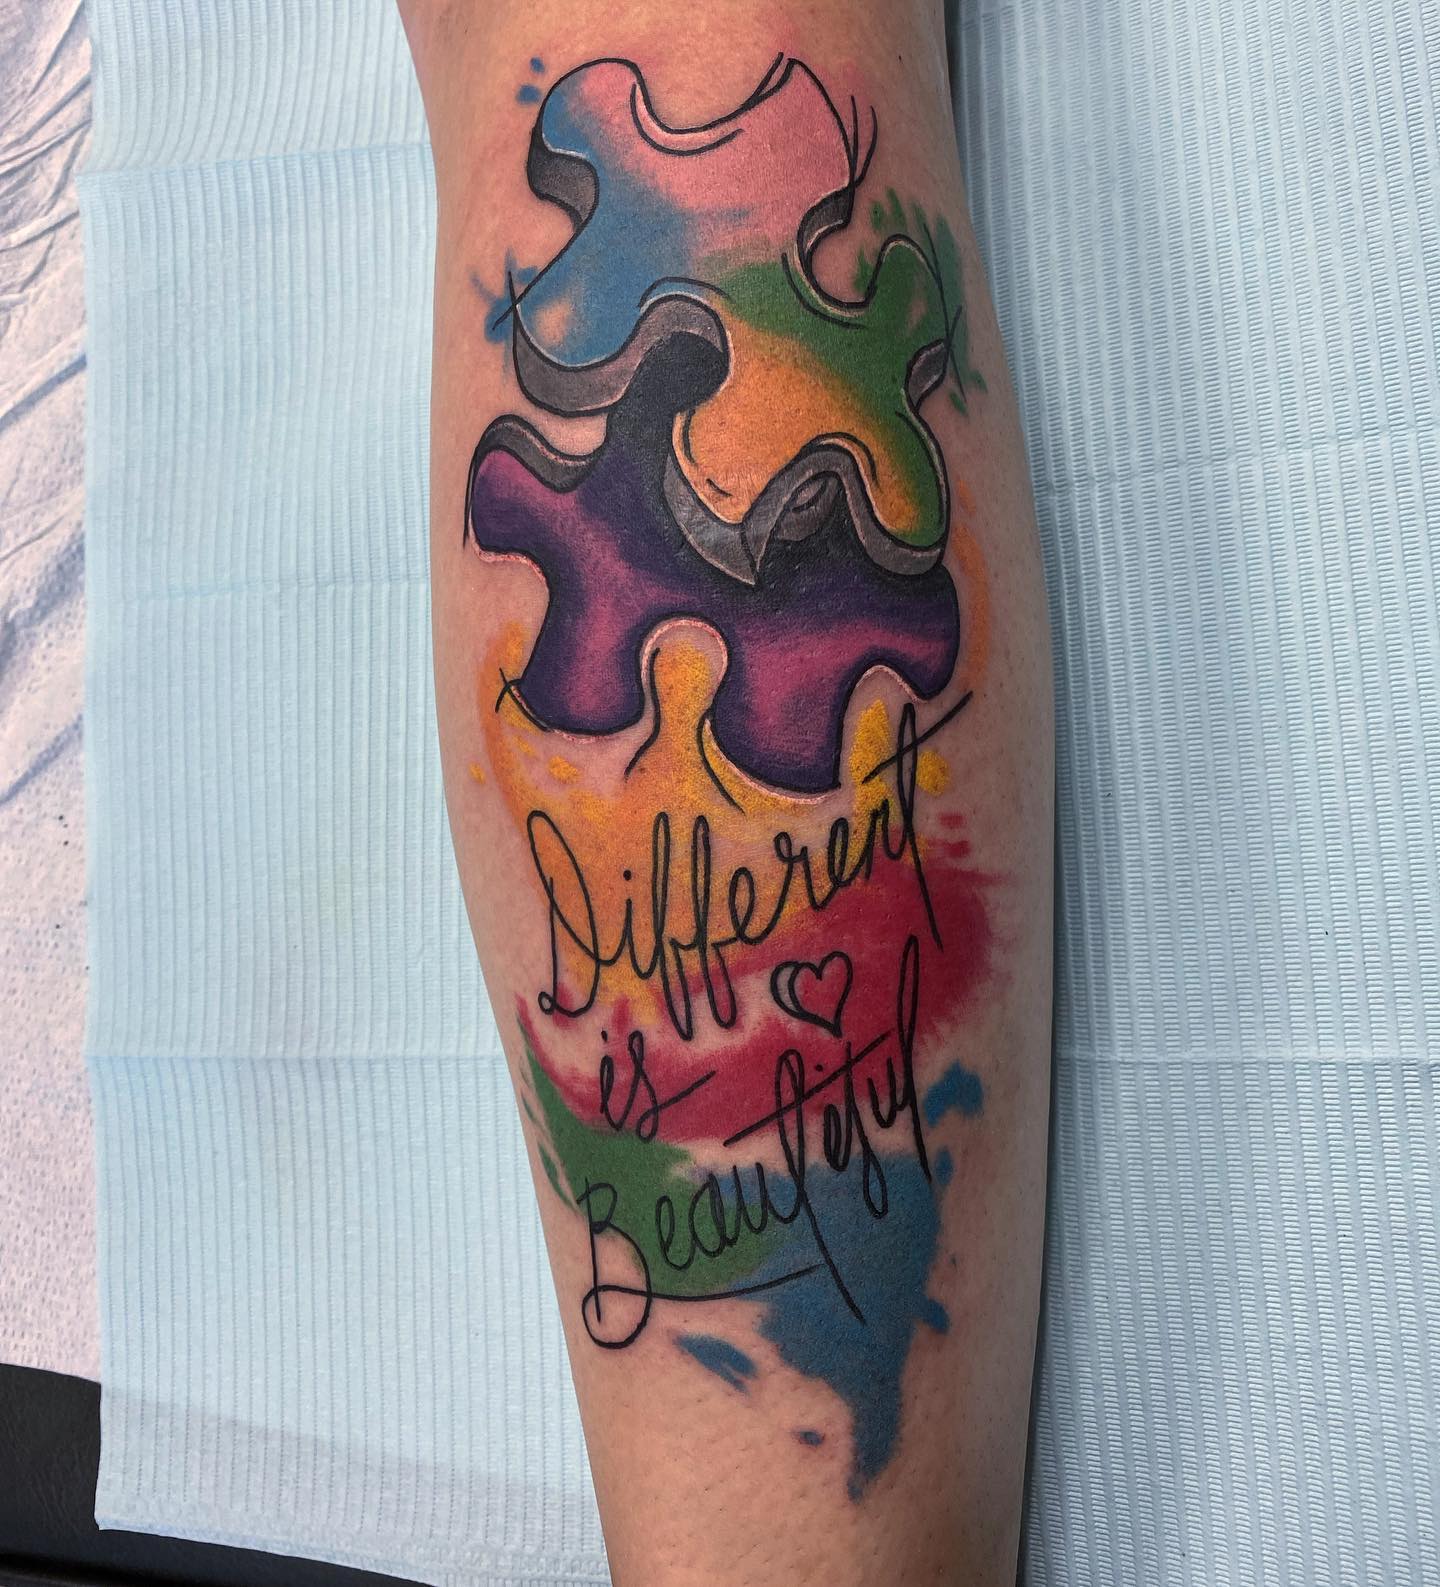 This bright tattoo is a colorful masterpiece. Show that you know how different can be gorgeous. Also, this design is harder to achieve, so book the best tattoo artist you know of.